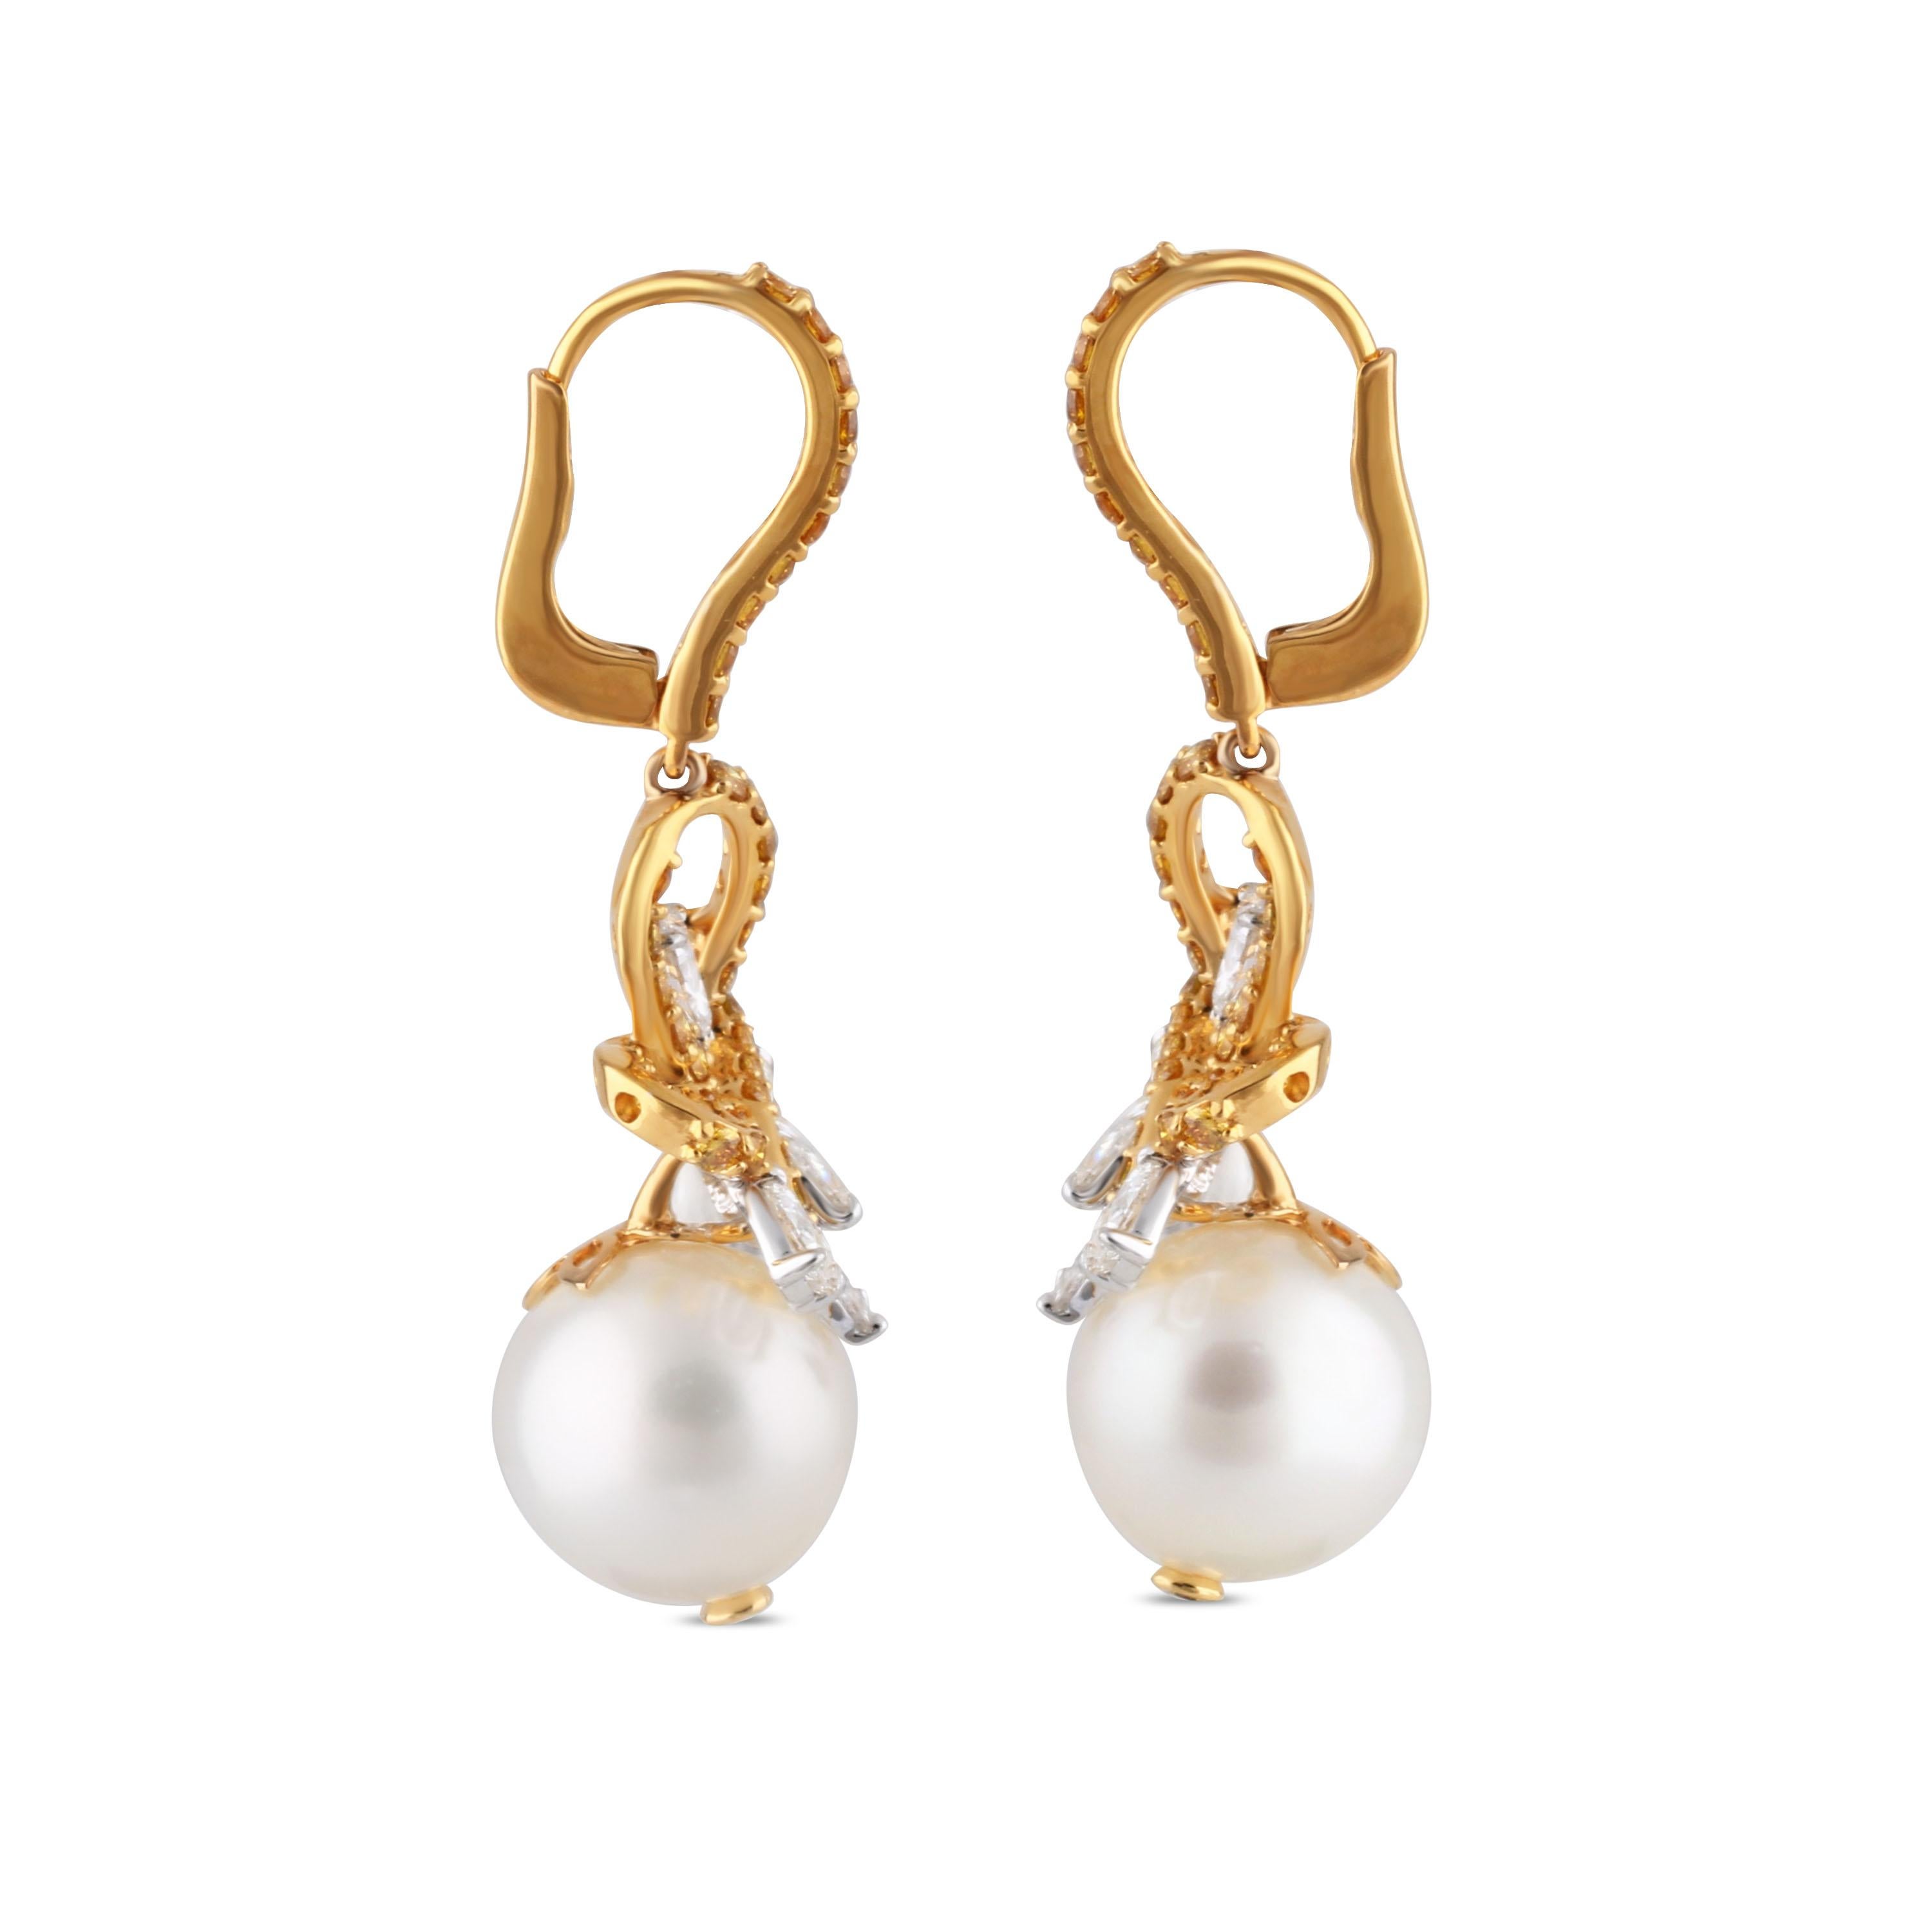 Round Cut Studio Rêves Diamond Bow with Lever-Back Dangling Pearl Earrings in 18K Gold